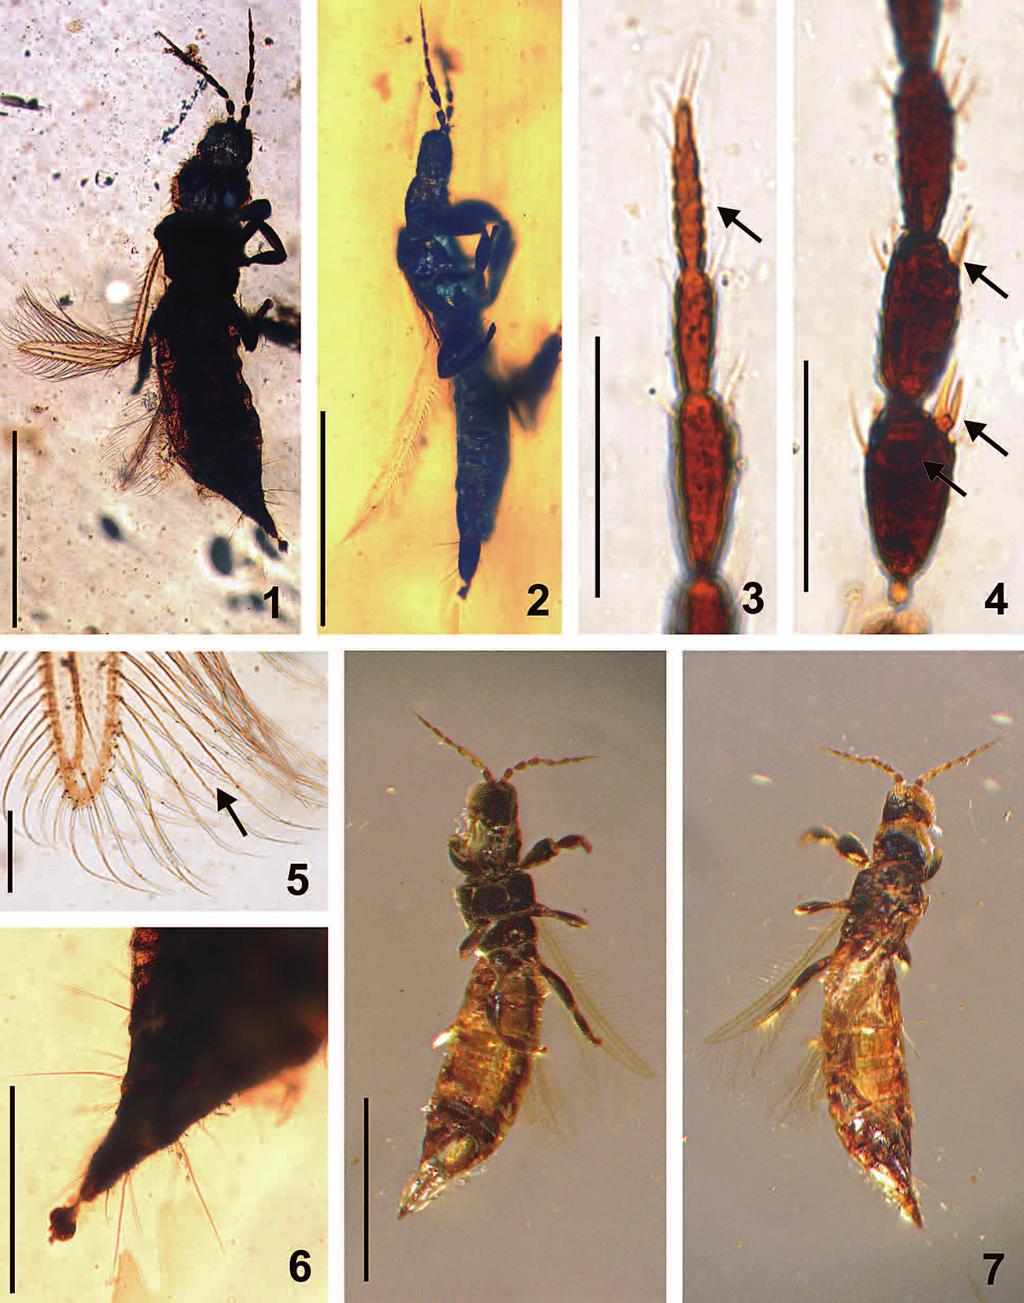 P. Nel, E. Peñalver, D. Azar, G. Hodebert & A. Nel Figure 5 Females of Tethysthrips n. gen. (Thripidae); Images 1 to 6 are of Tethysthrips hispanicus n. gen., n. sp., holotype ES-07-11.